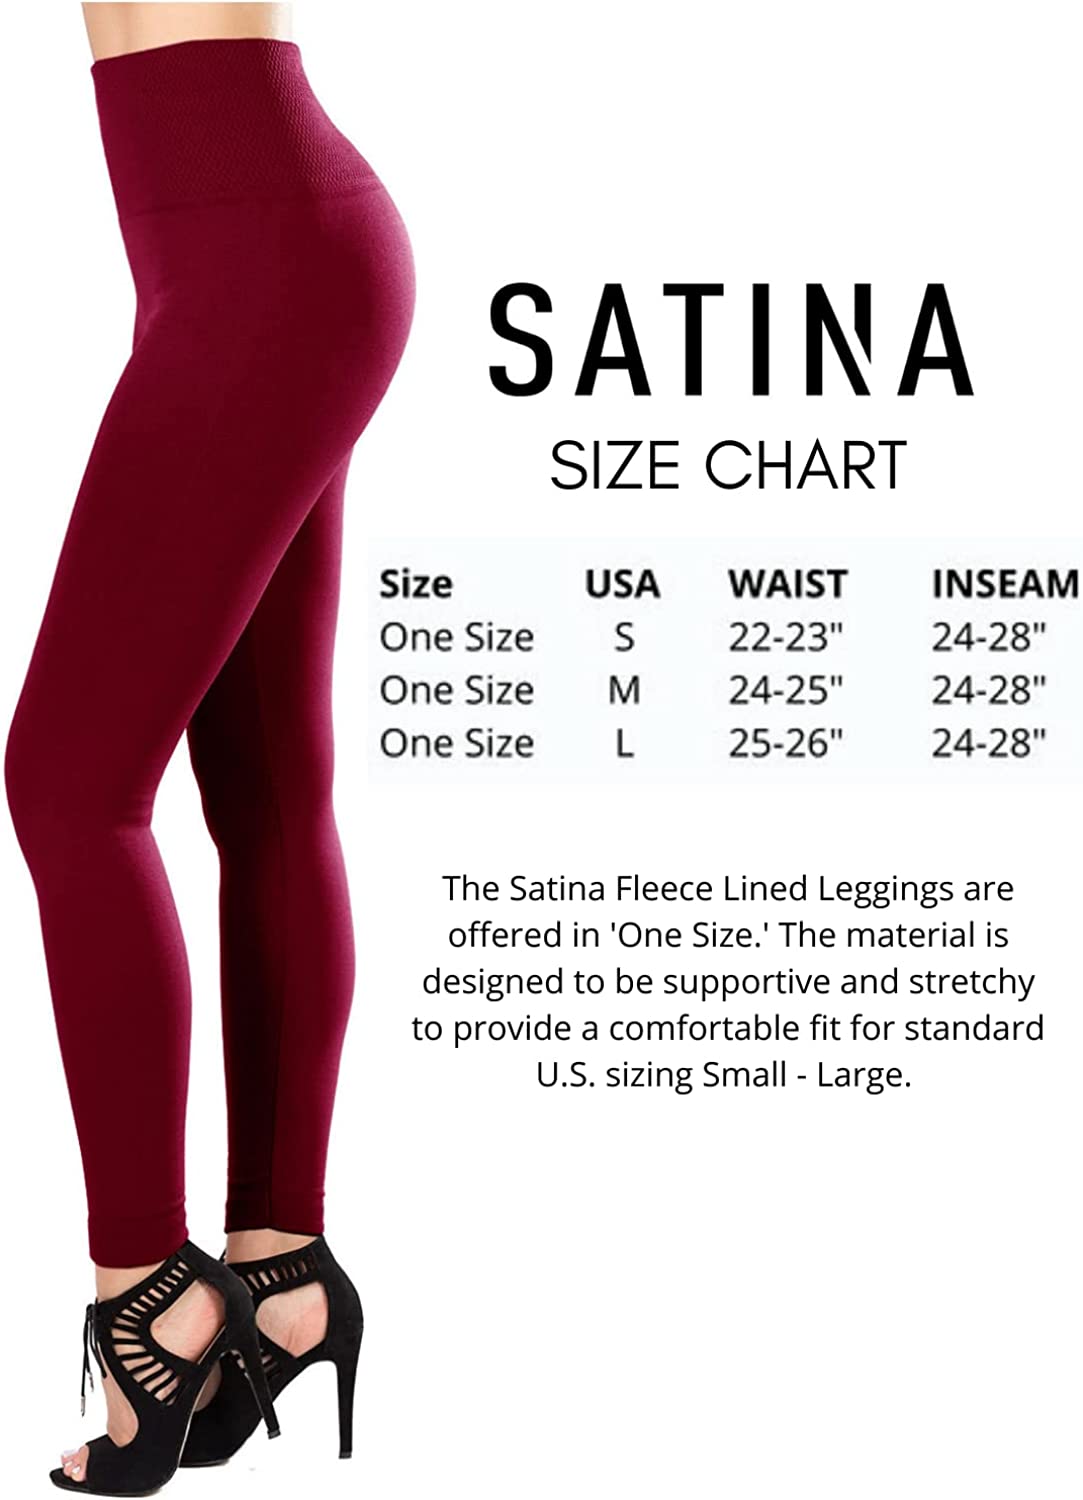 Satina Fleece Lined Leggings High Waist Compression Slimming Warm Opaque Tights (One Size, Burgundy) - image 2 of 6